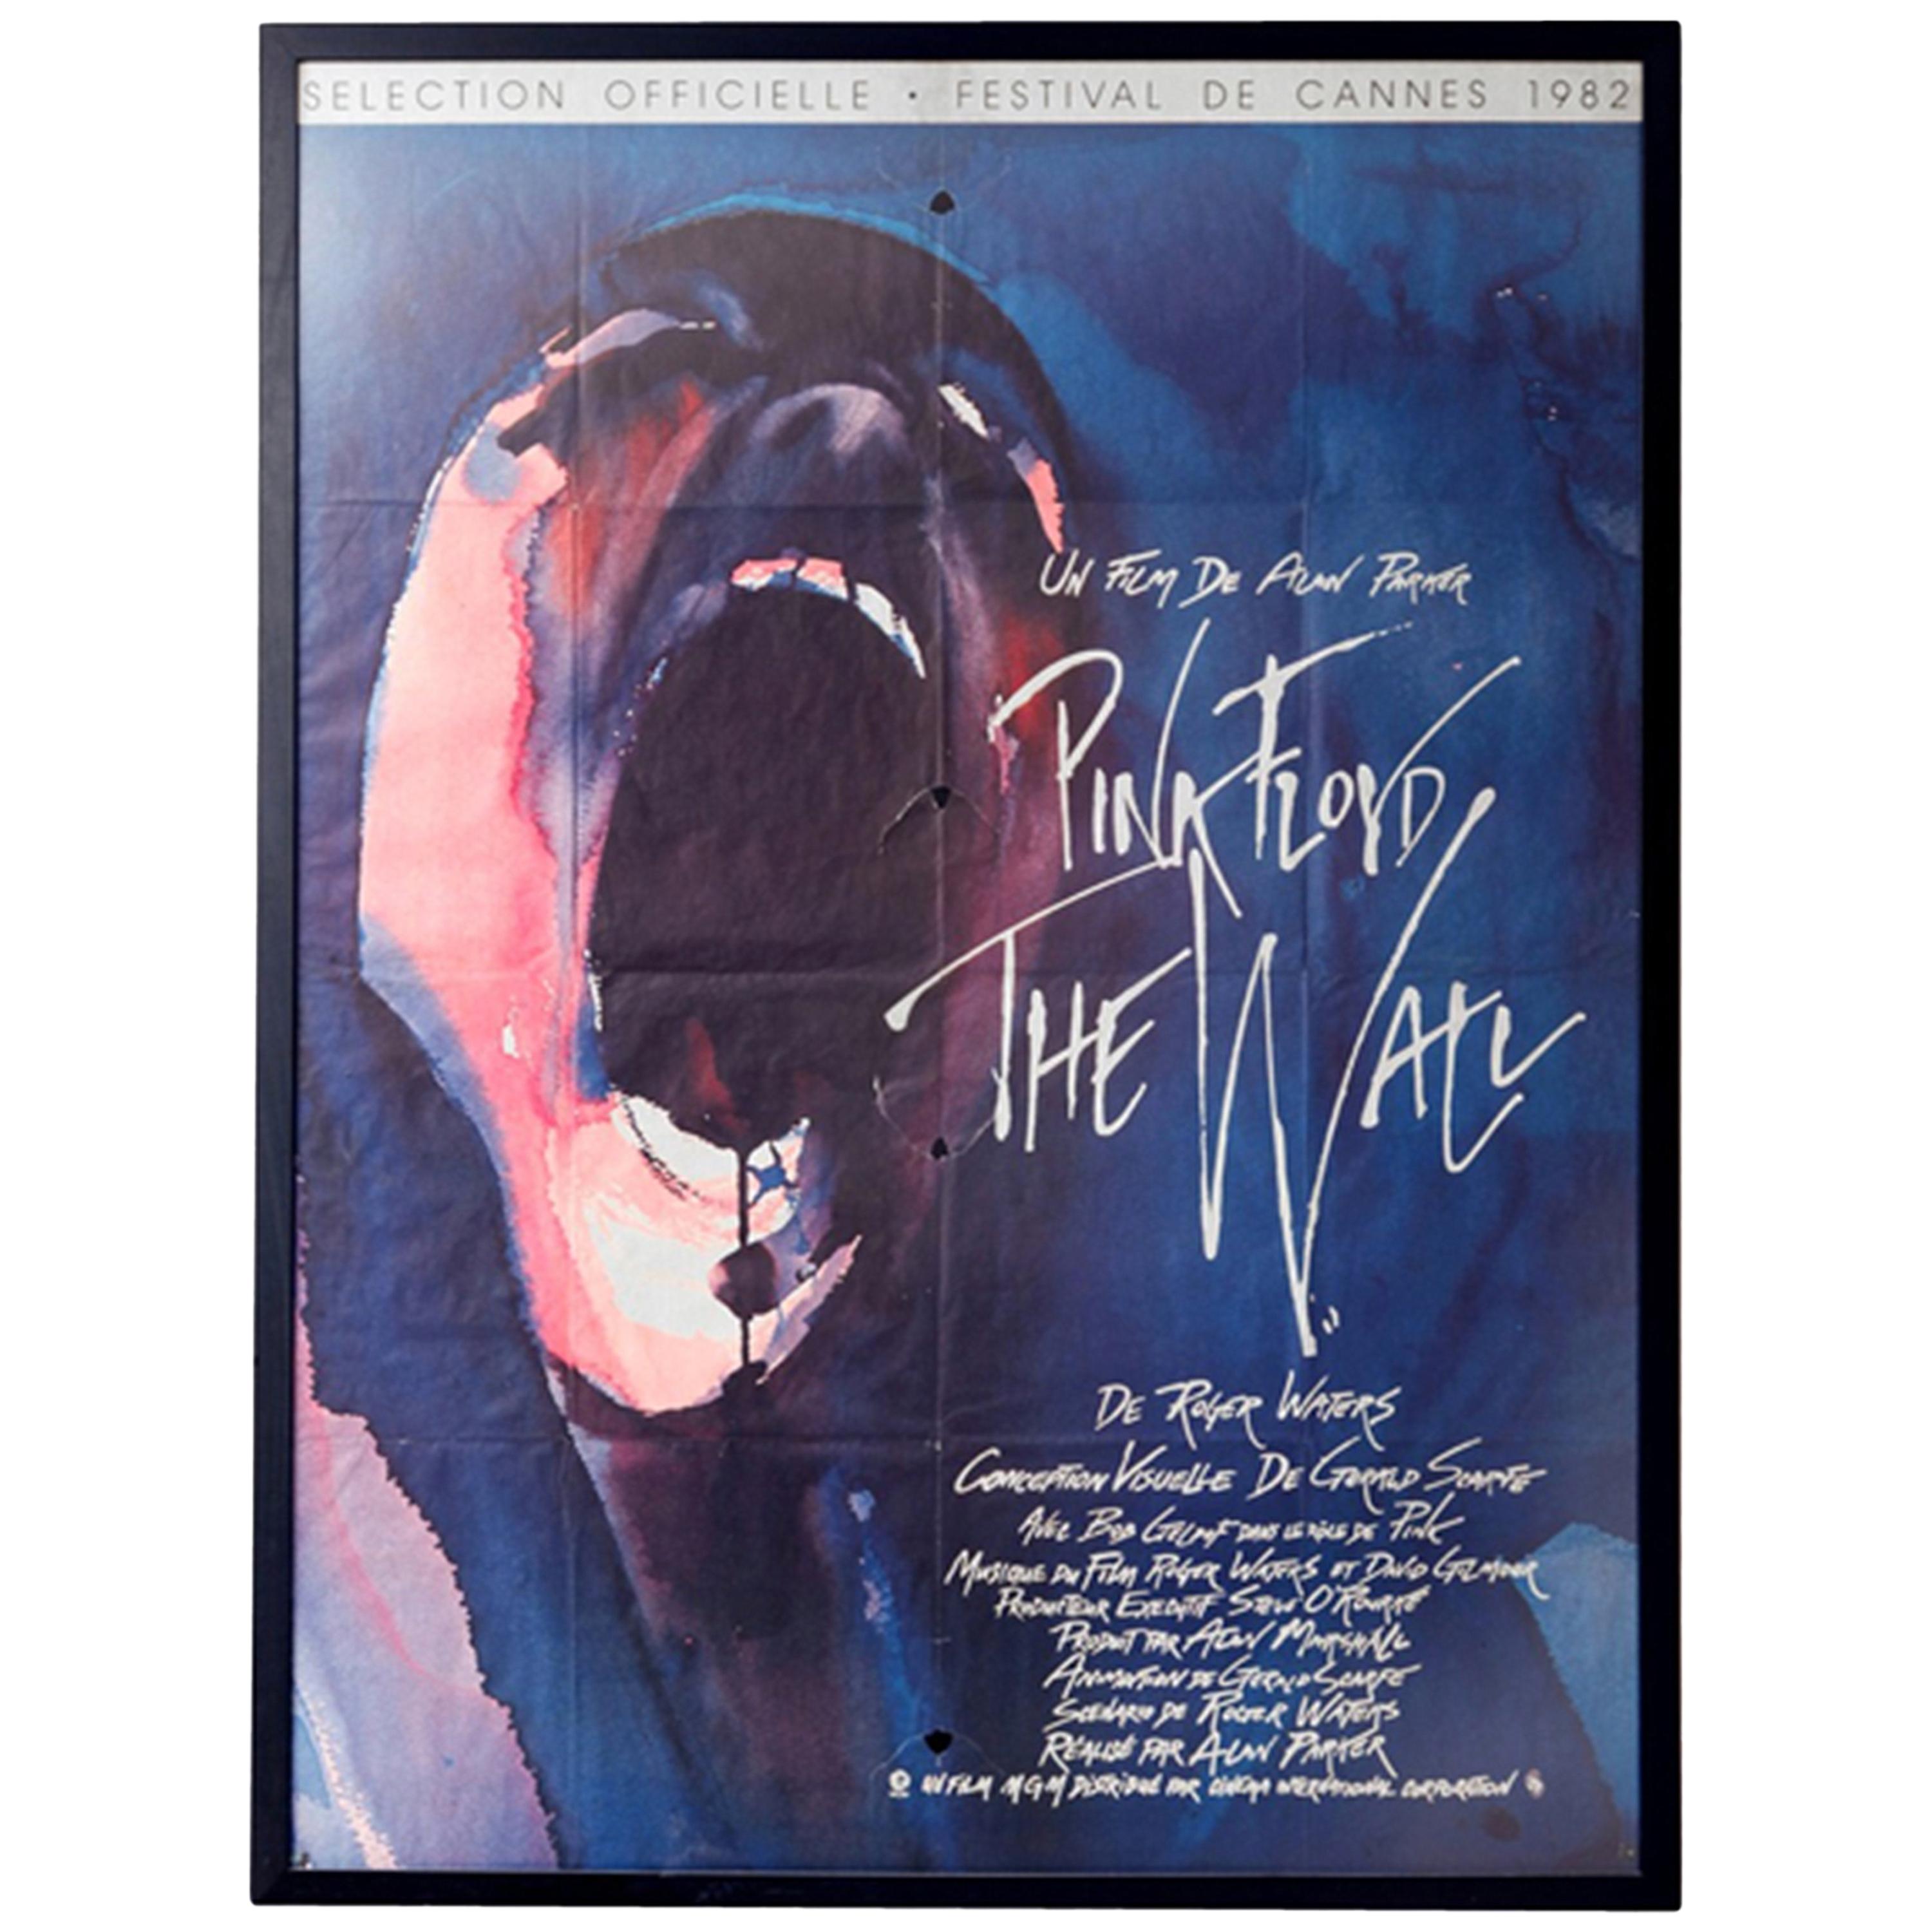 XXL Framed "Pink Floyd The Wall" Film Poster 1982 Vintage Retro Music Blue Black For Sale